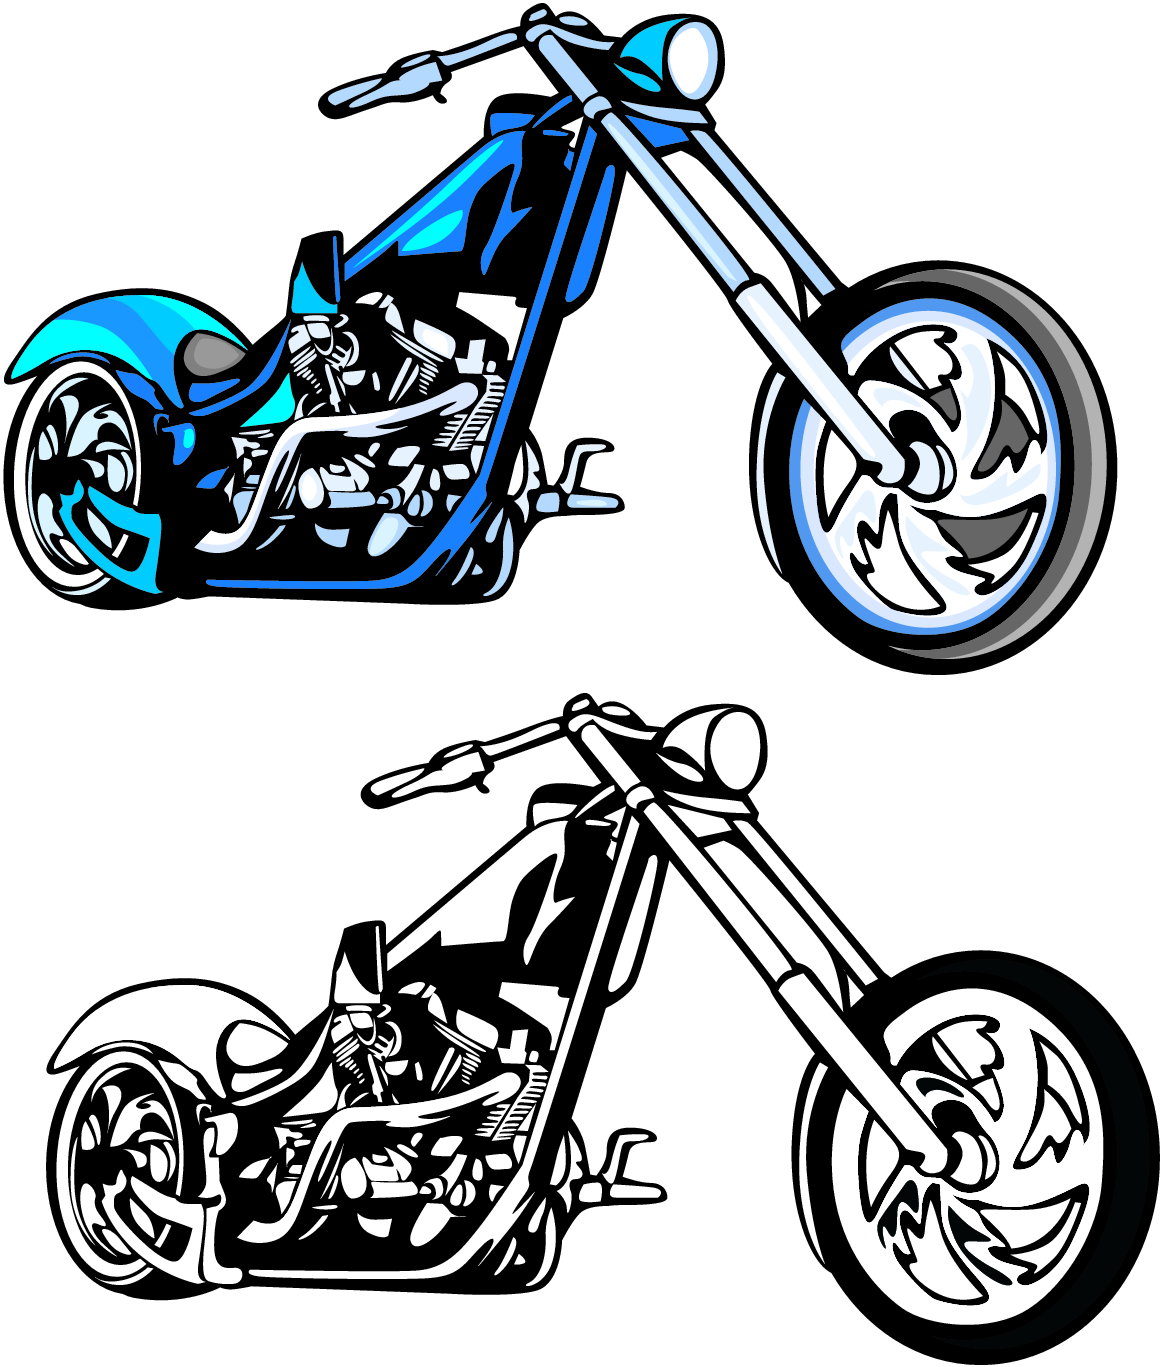 Motorcycle Chopper Clipart Hd Images 3 HD Wallpapers | aduphoto.